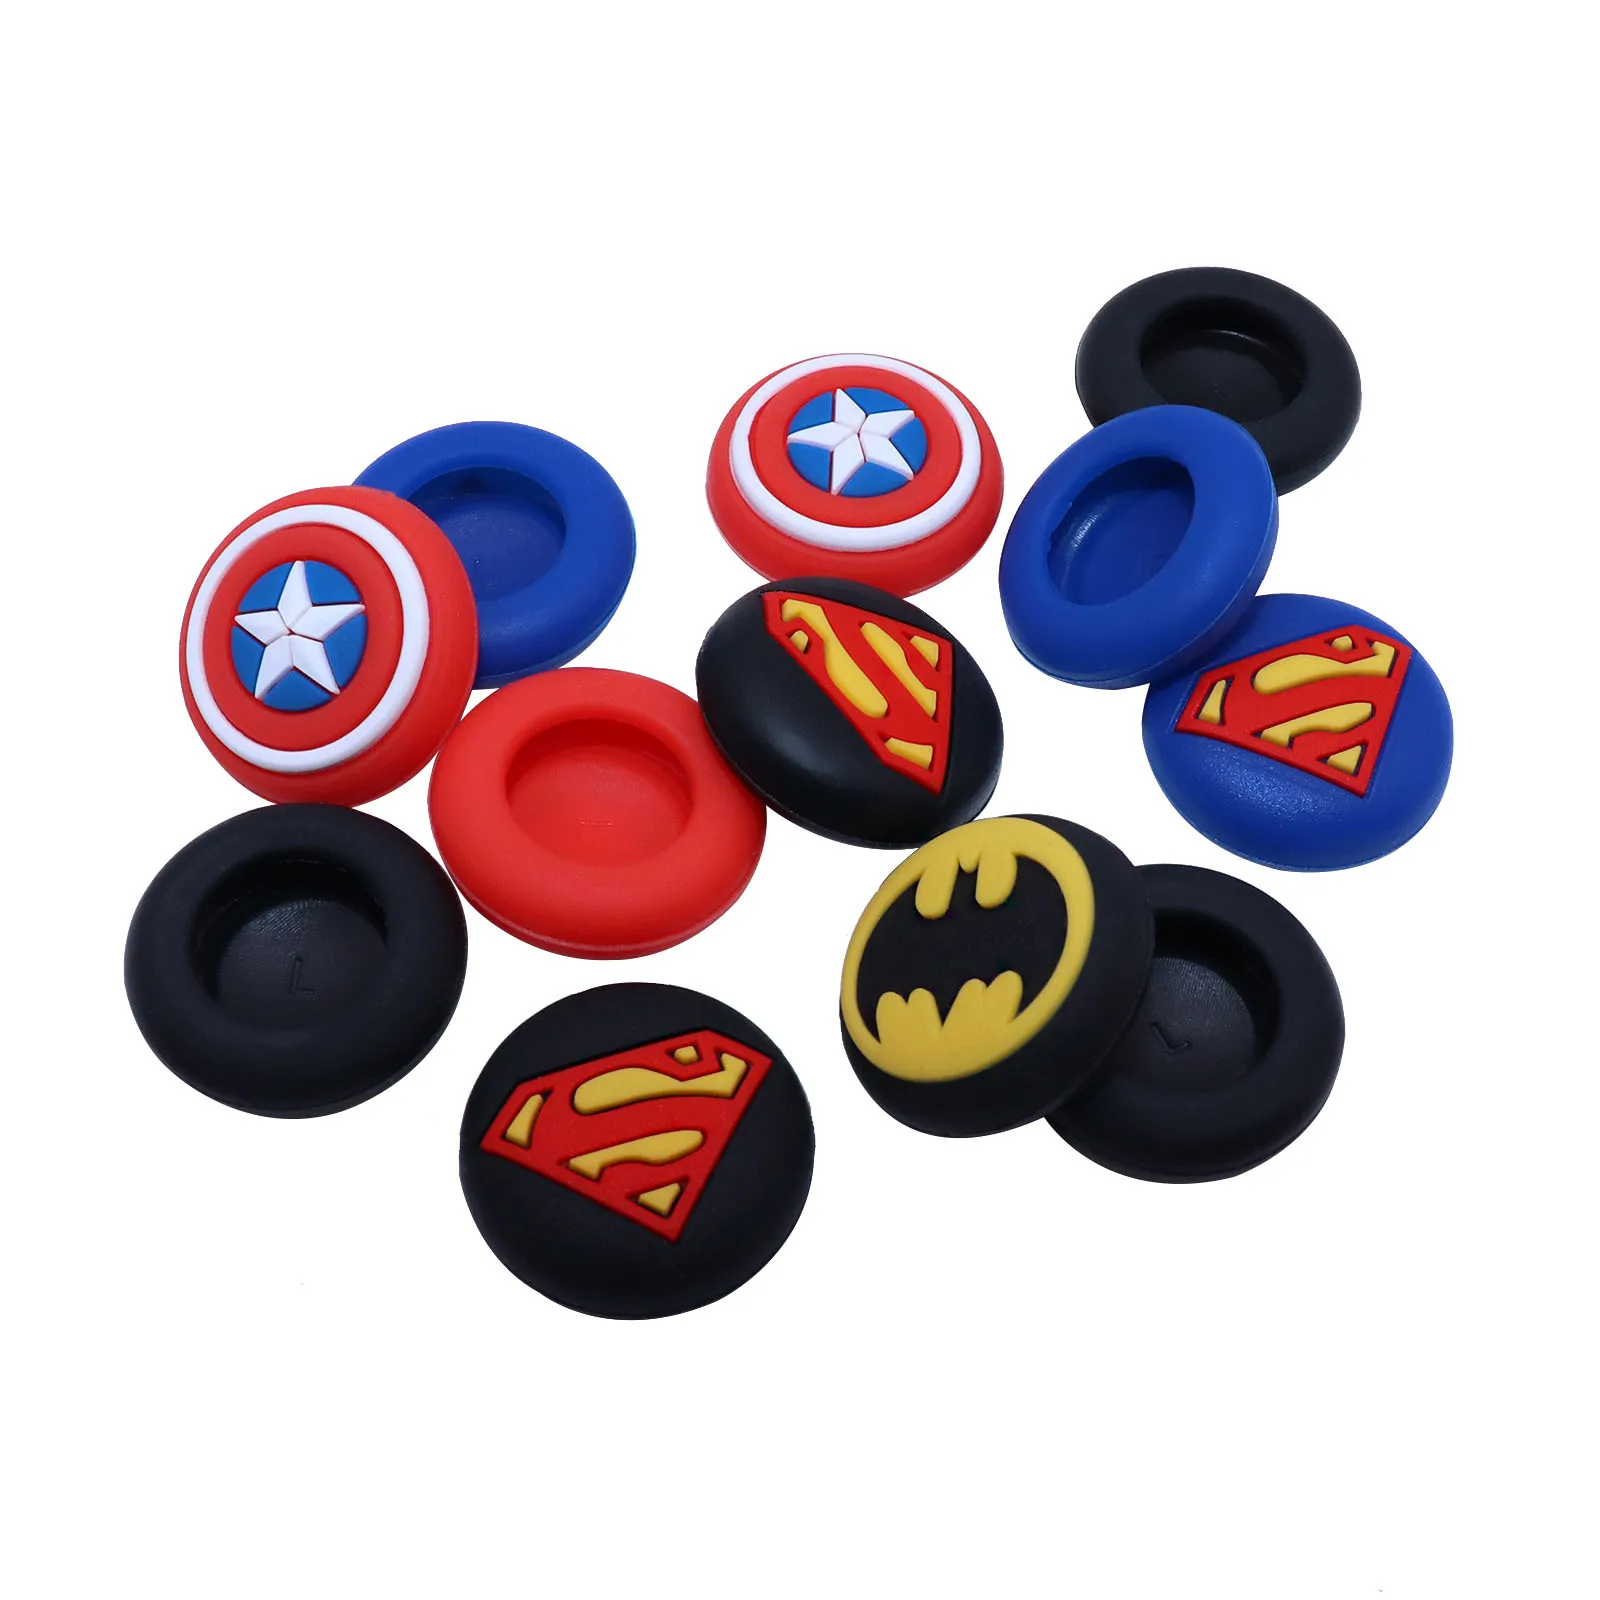 

Silicone Thumb Stick Grip Key-Cap For PS3/PS4/PS5/Xbox One S/Series X/Xbox 360/Switch Pro Controller Gamepad Game Console Case, Multicolor